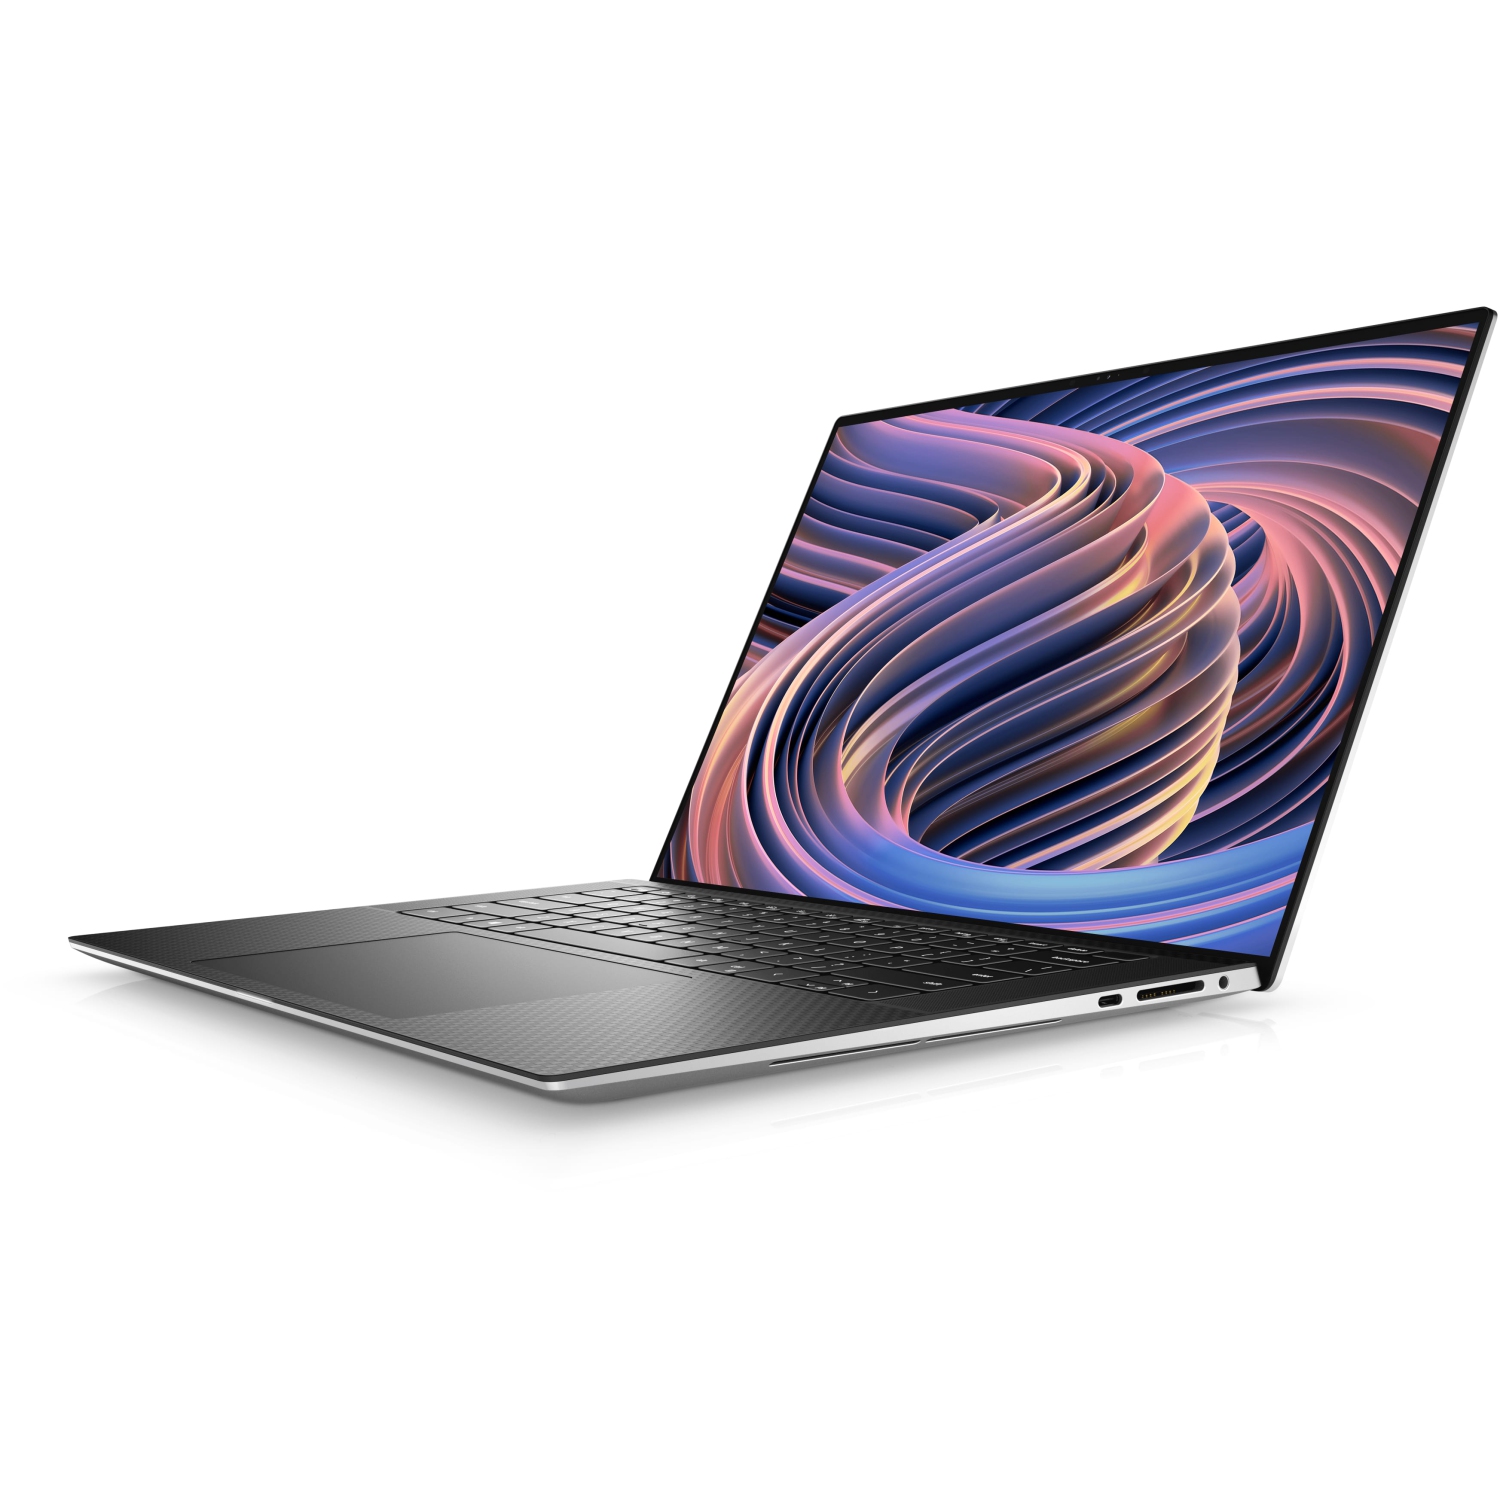 Refurbished (Excellent) – Dell XPS 9520 Laptop (2022) | 15.6" FHD+ | Core i7 - 2TB SSD - 32GB RAM - RTX 3050 | 14 Cores @ 4.7 GHz - 12th Gen CPU